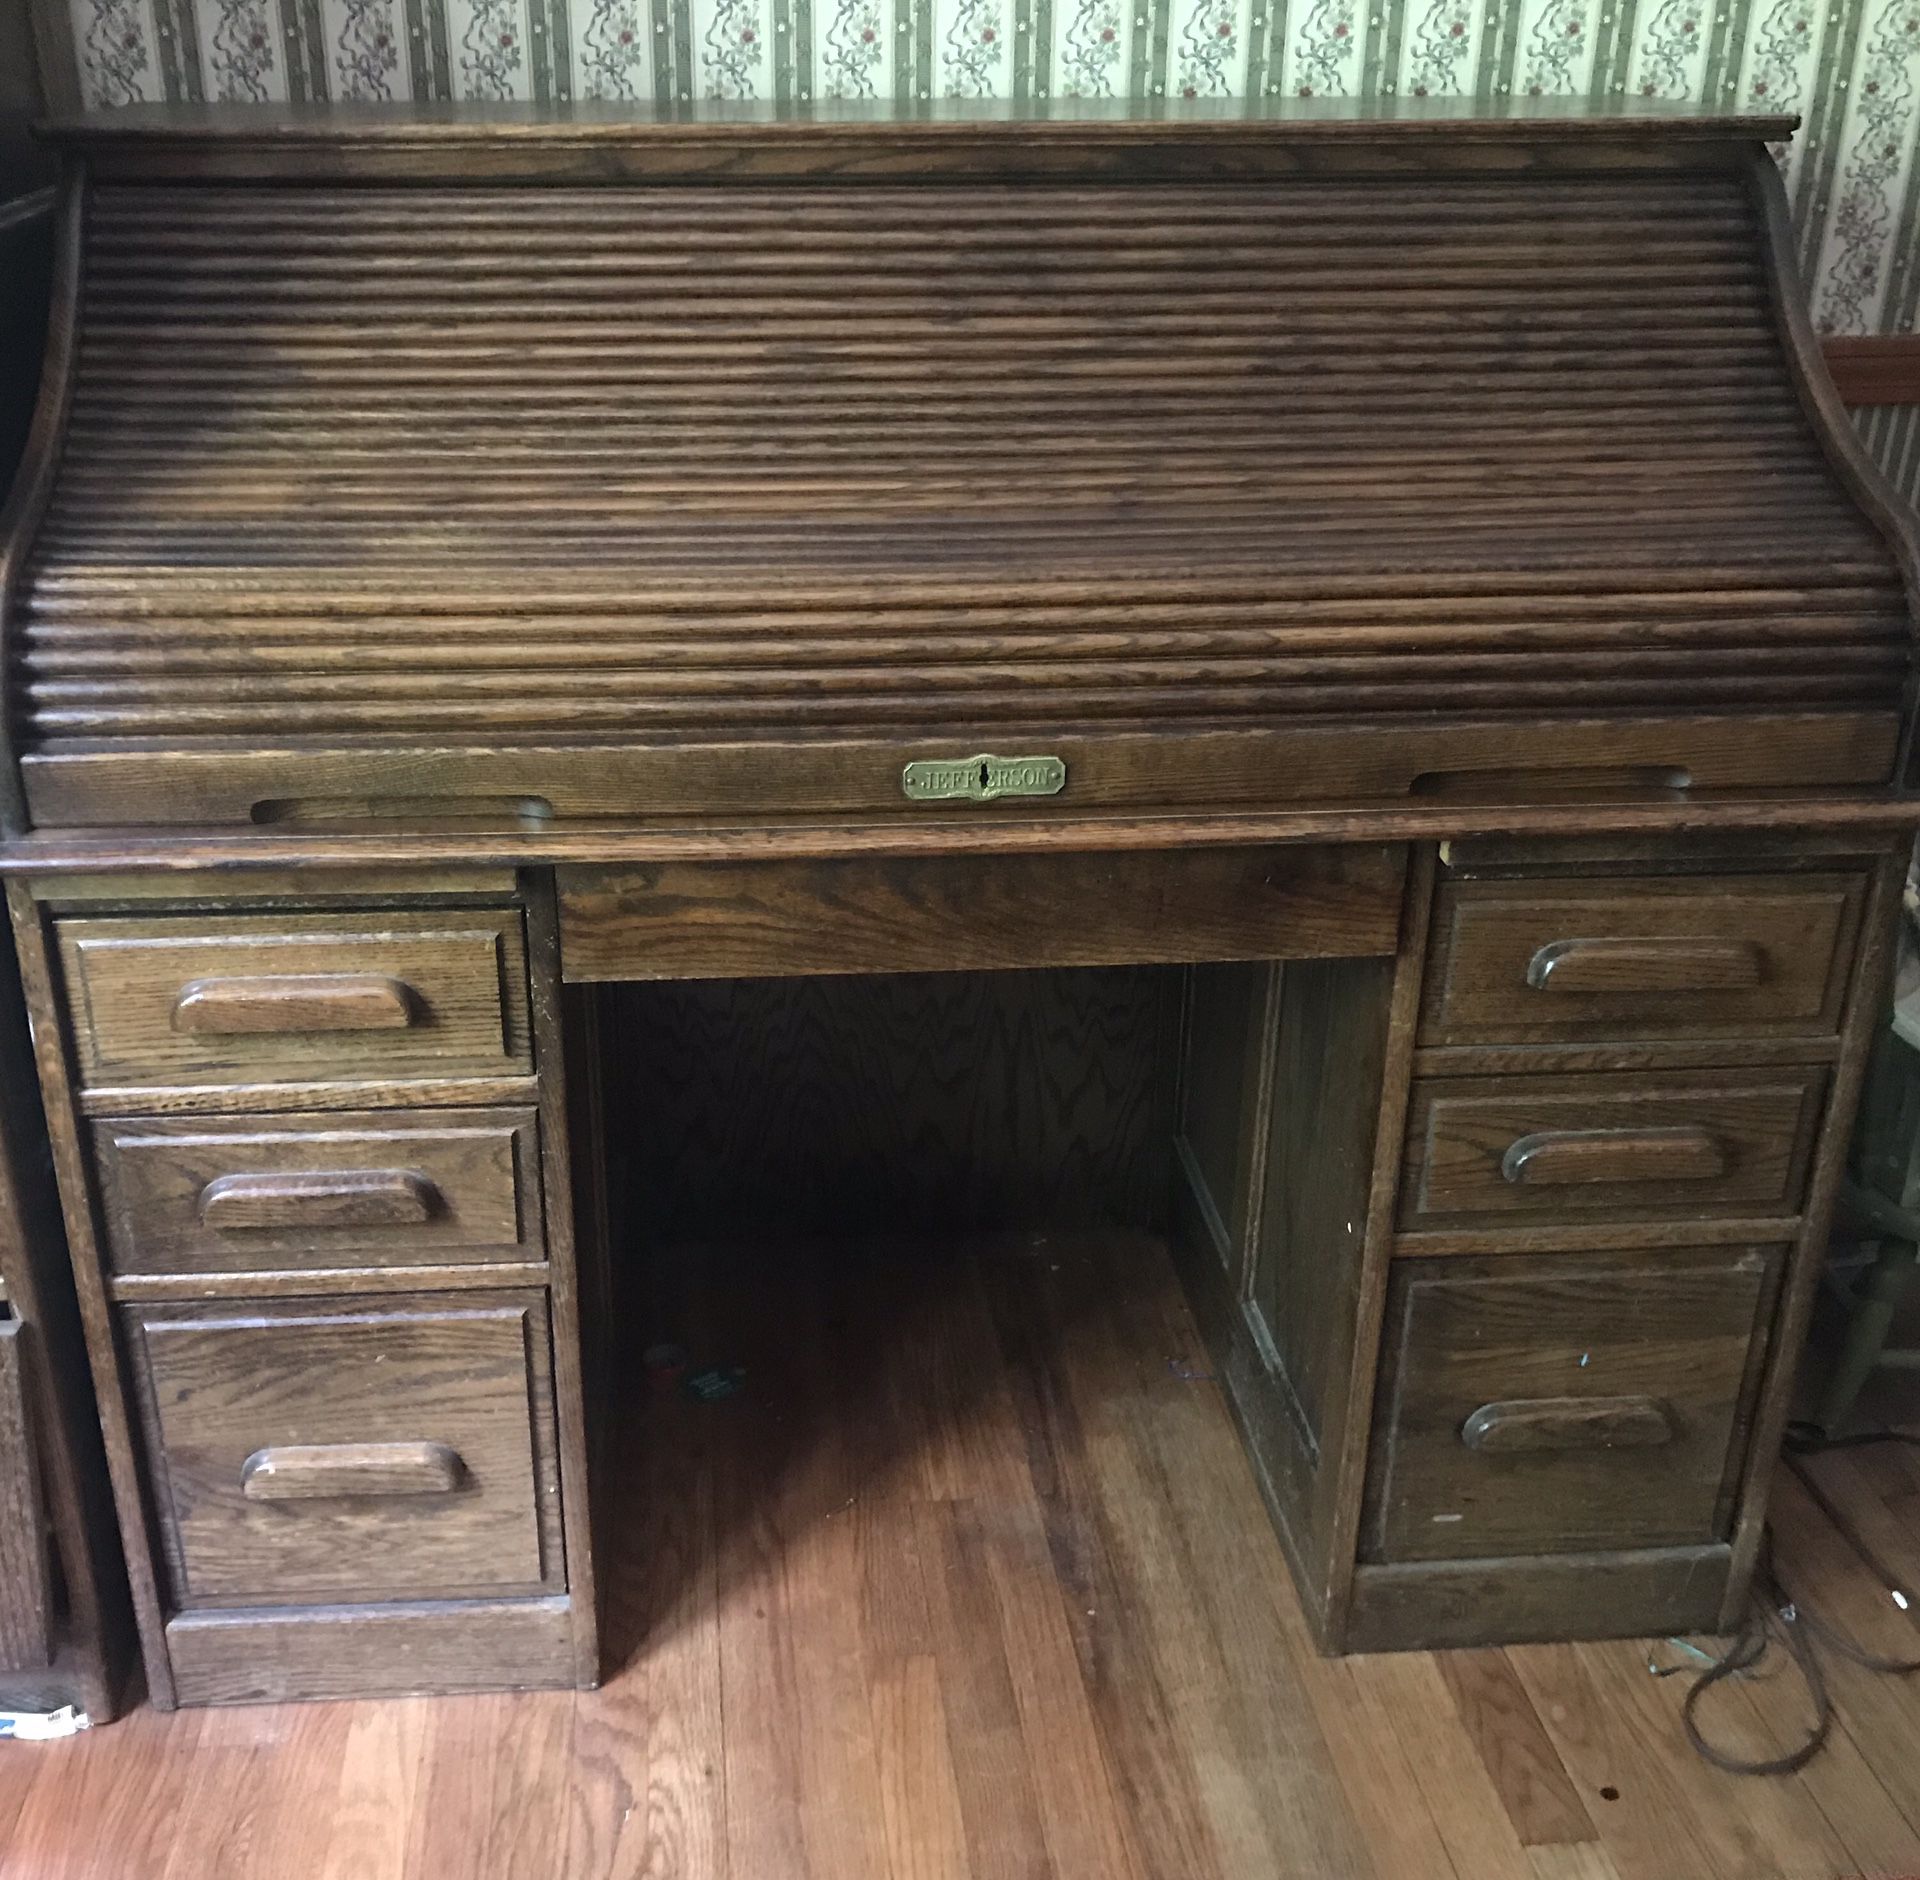 Oak roll top desk made by Jefferson- moving to the West, last chance to purchase this desk and/or filing cabinet